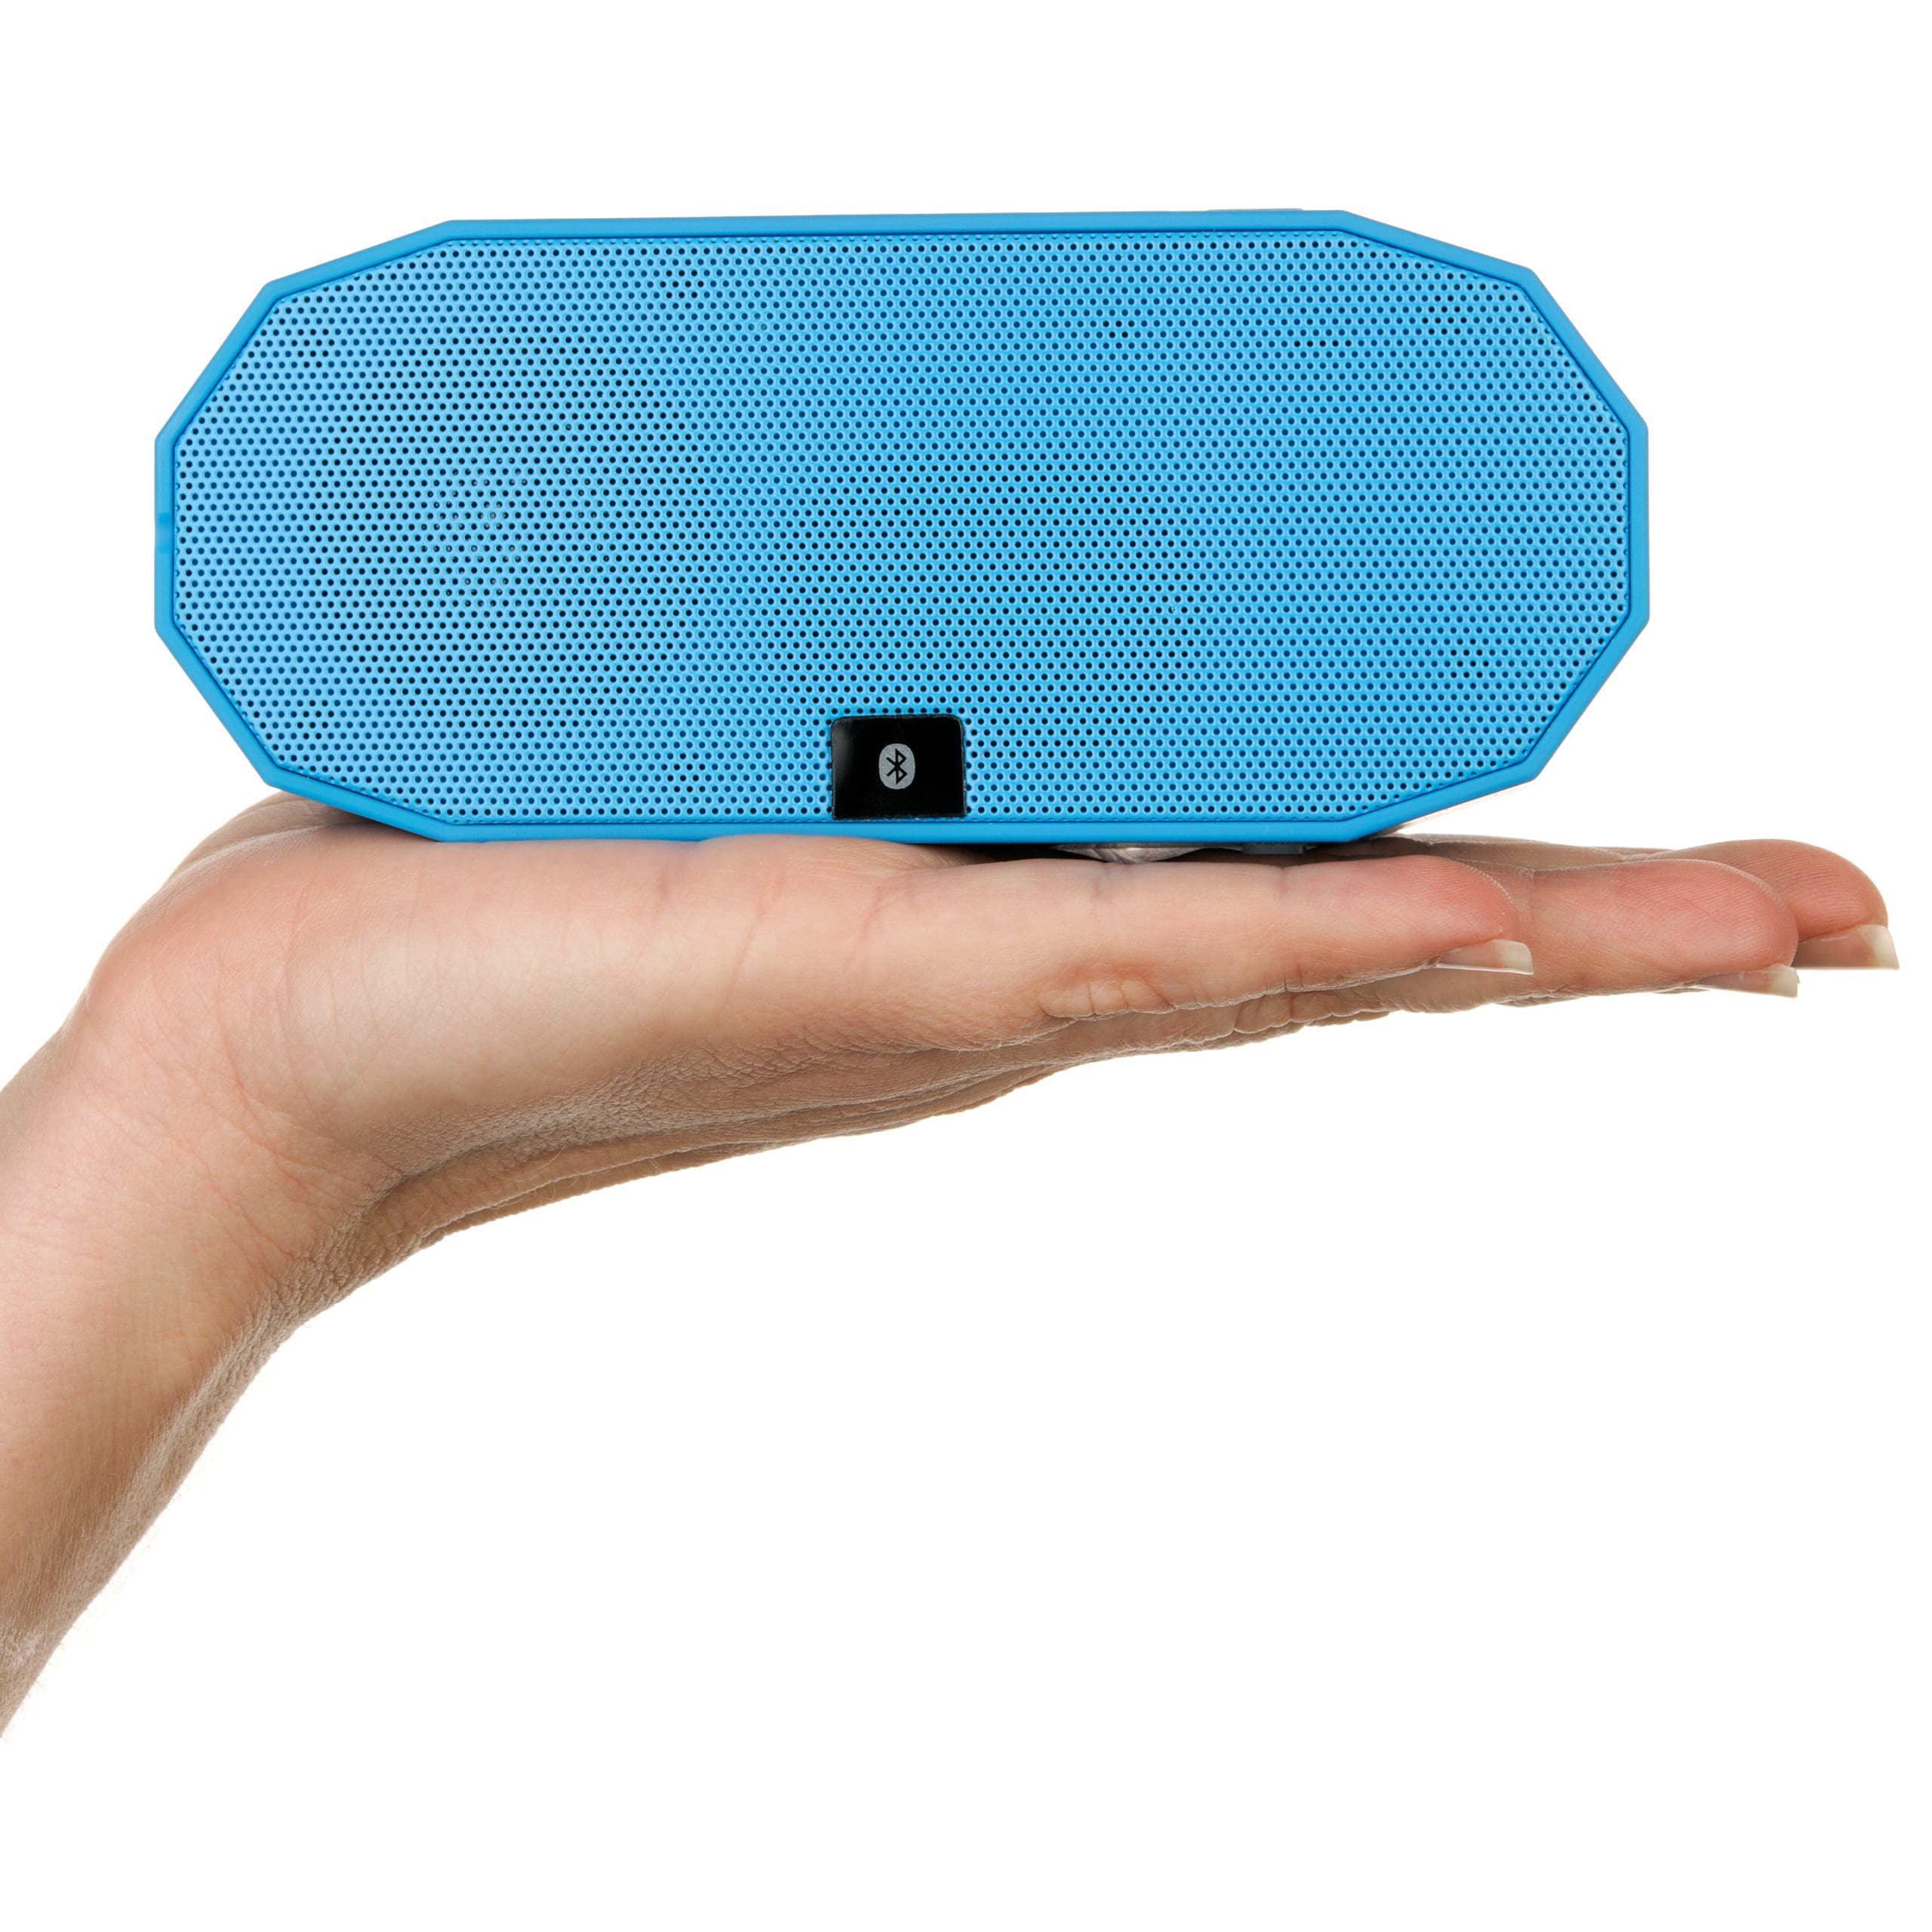 A Bluetooth speaker being hold by a hand model, on a white background.